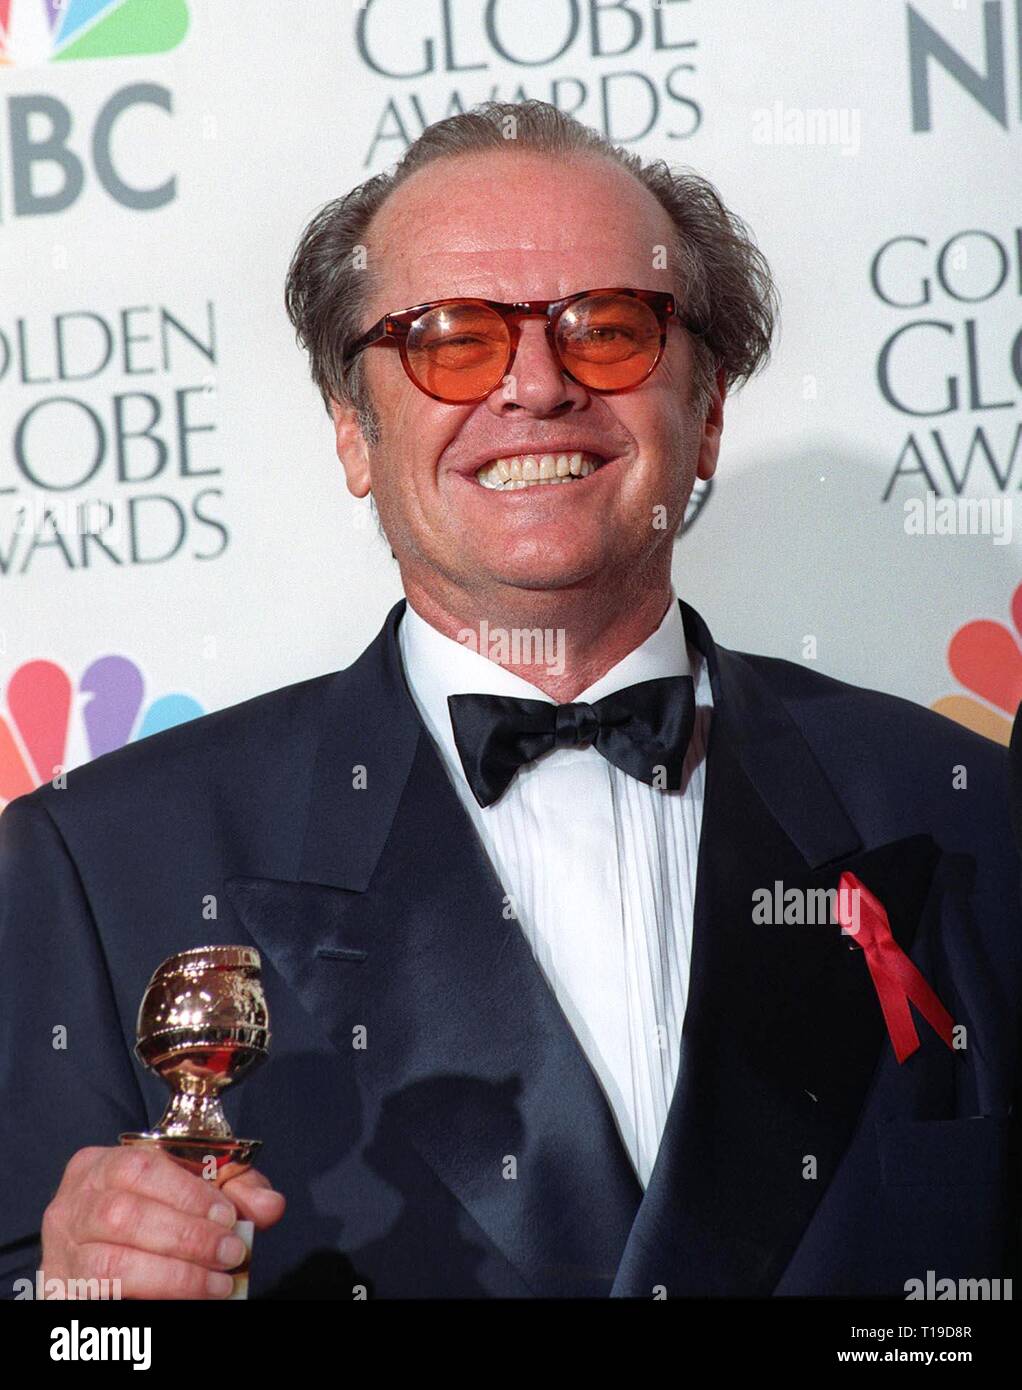 LOS ANGELES, CA - January 18, 1998: Actor JACK NICHOLSON at the Golden Globe Awards where he won Best Actor award for Movie Comedy for 'As Good As It Gets.' Stock Photo